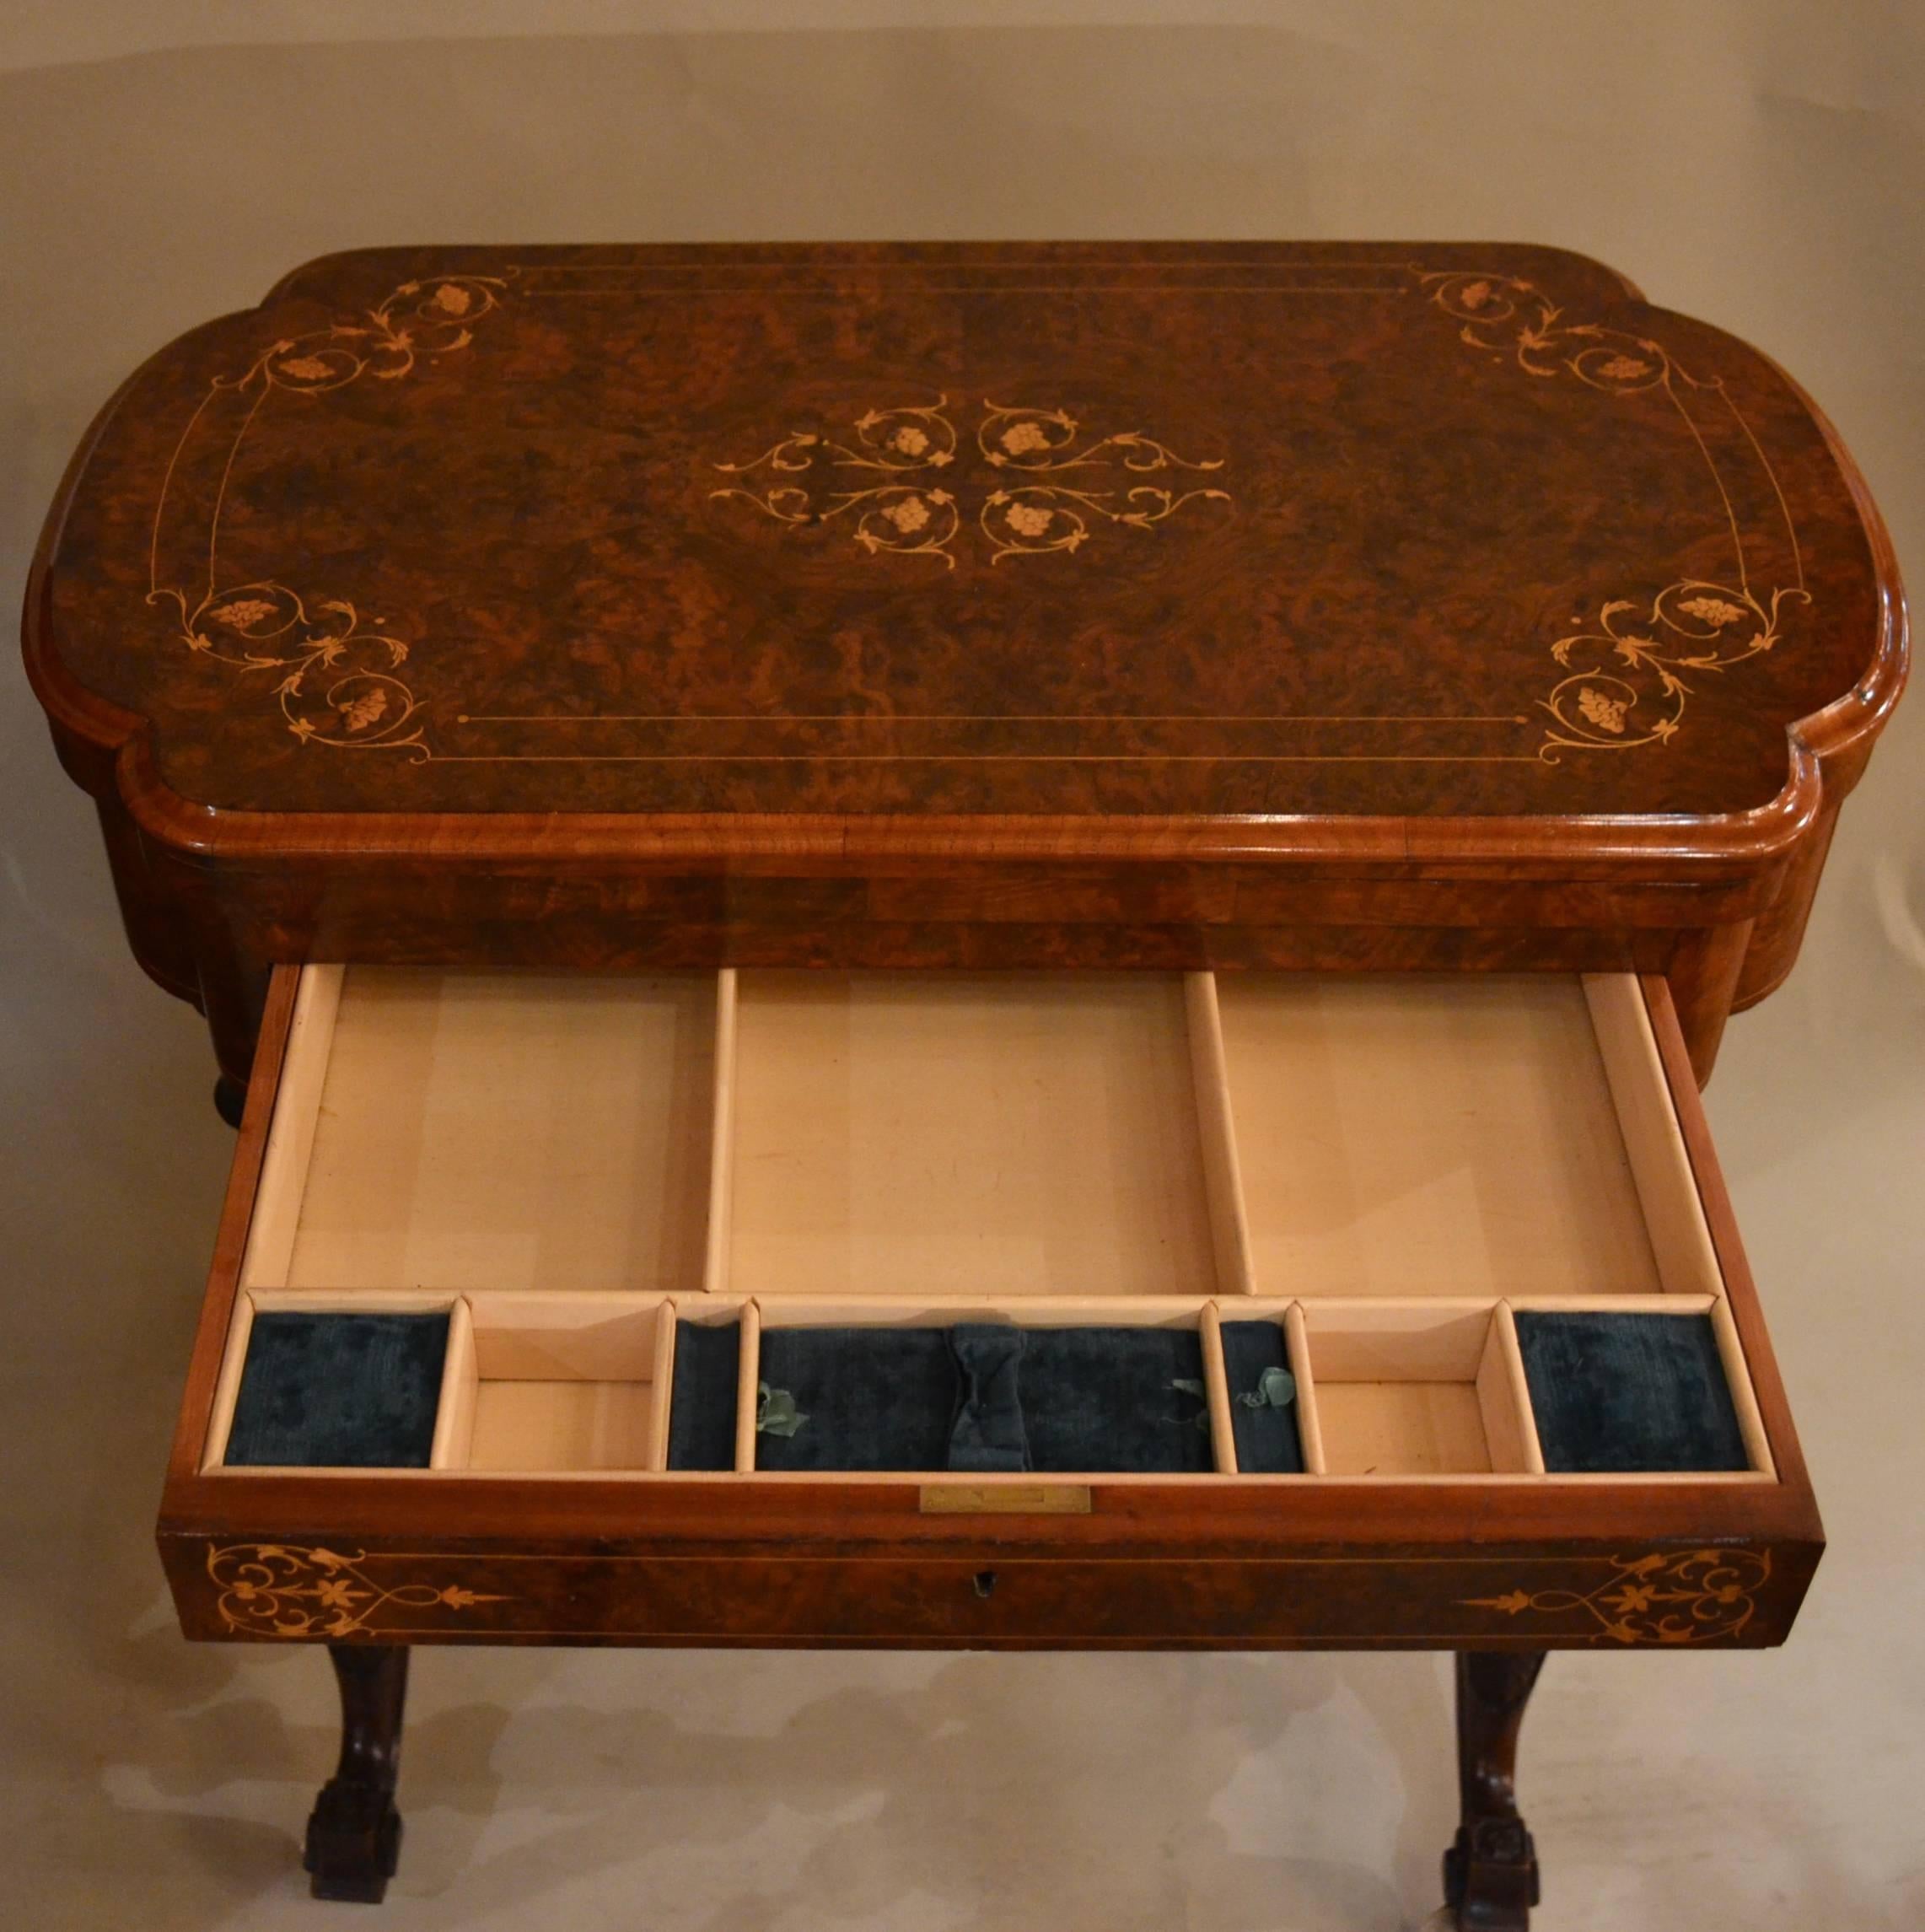 Late 19th Century Antique English Burled Walnut Games Table